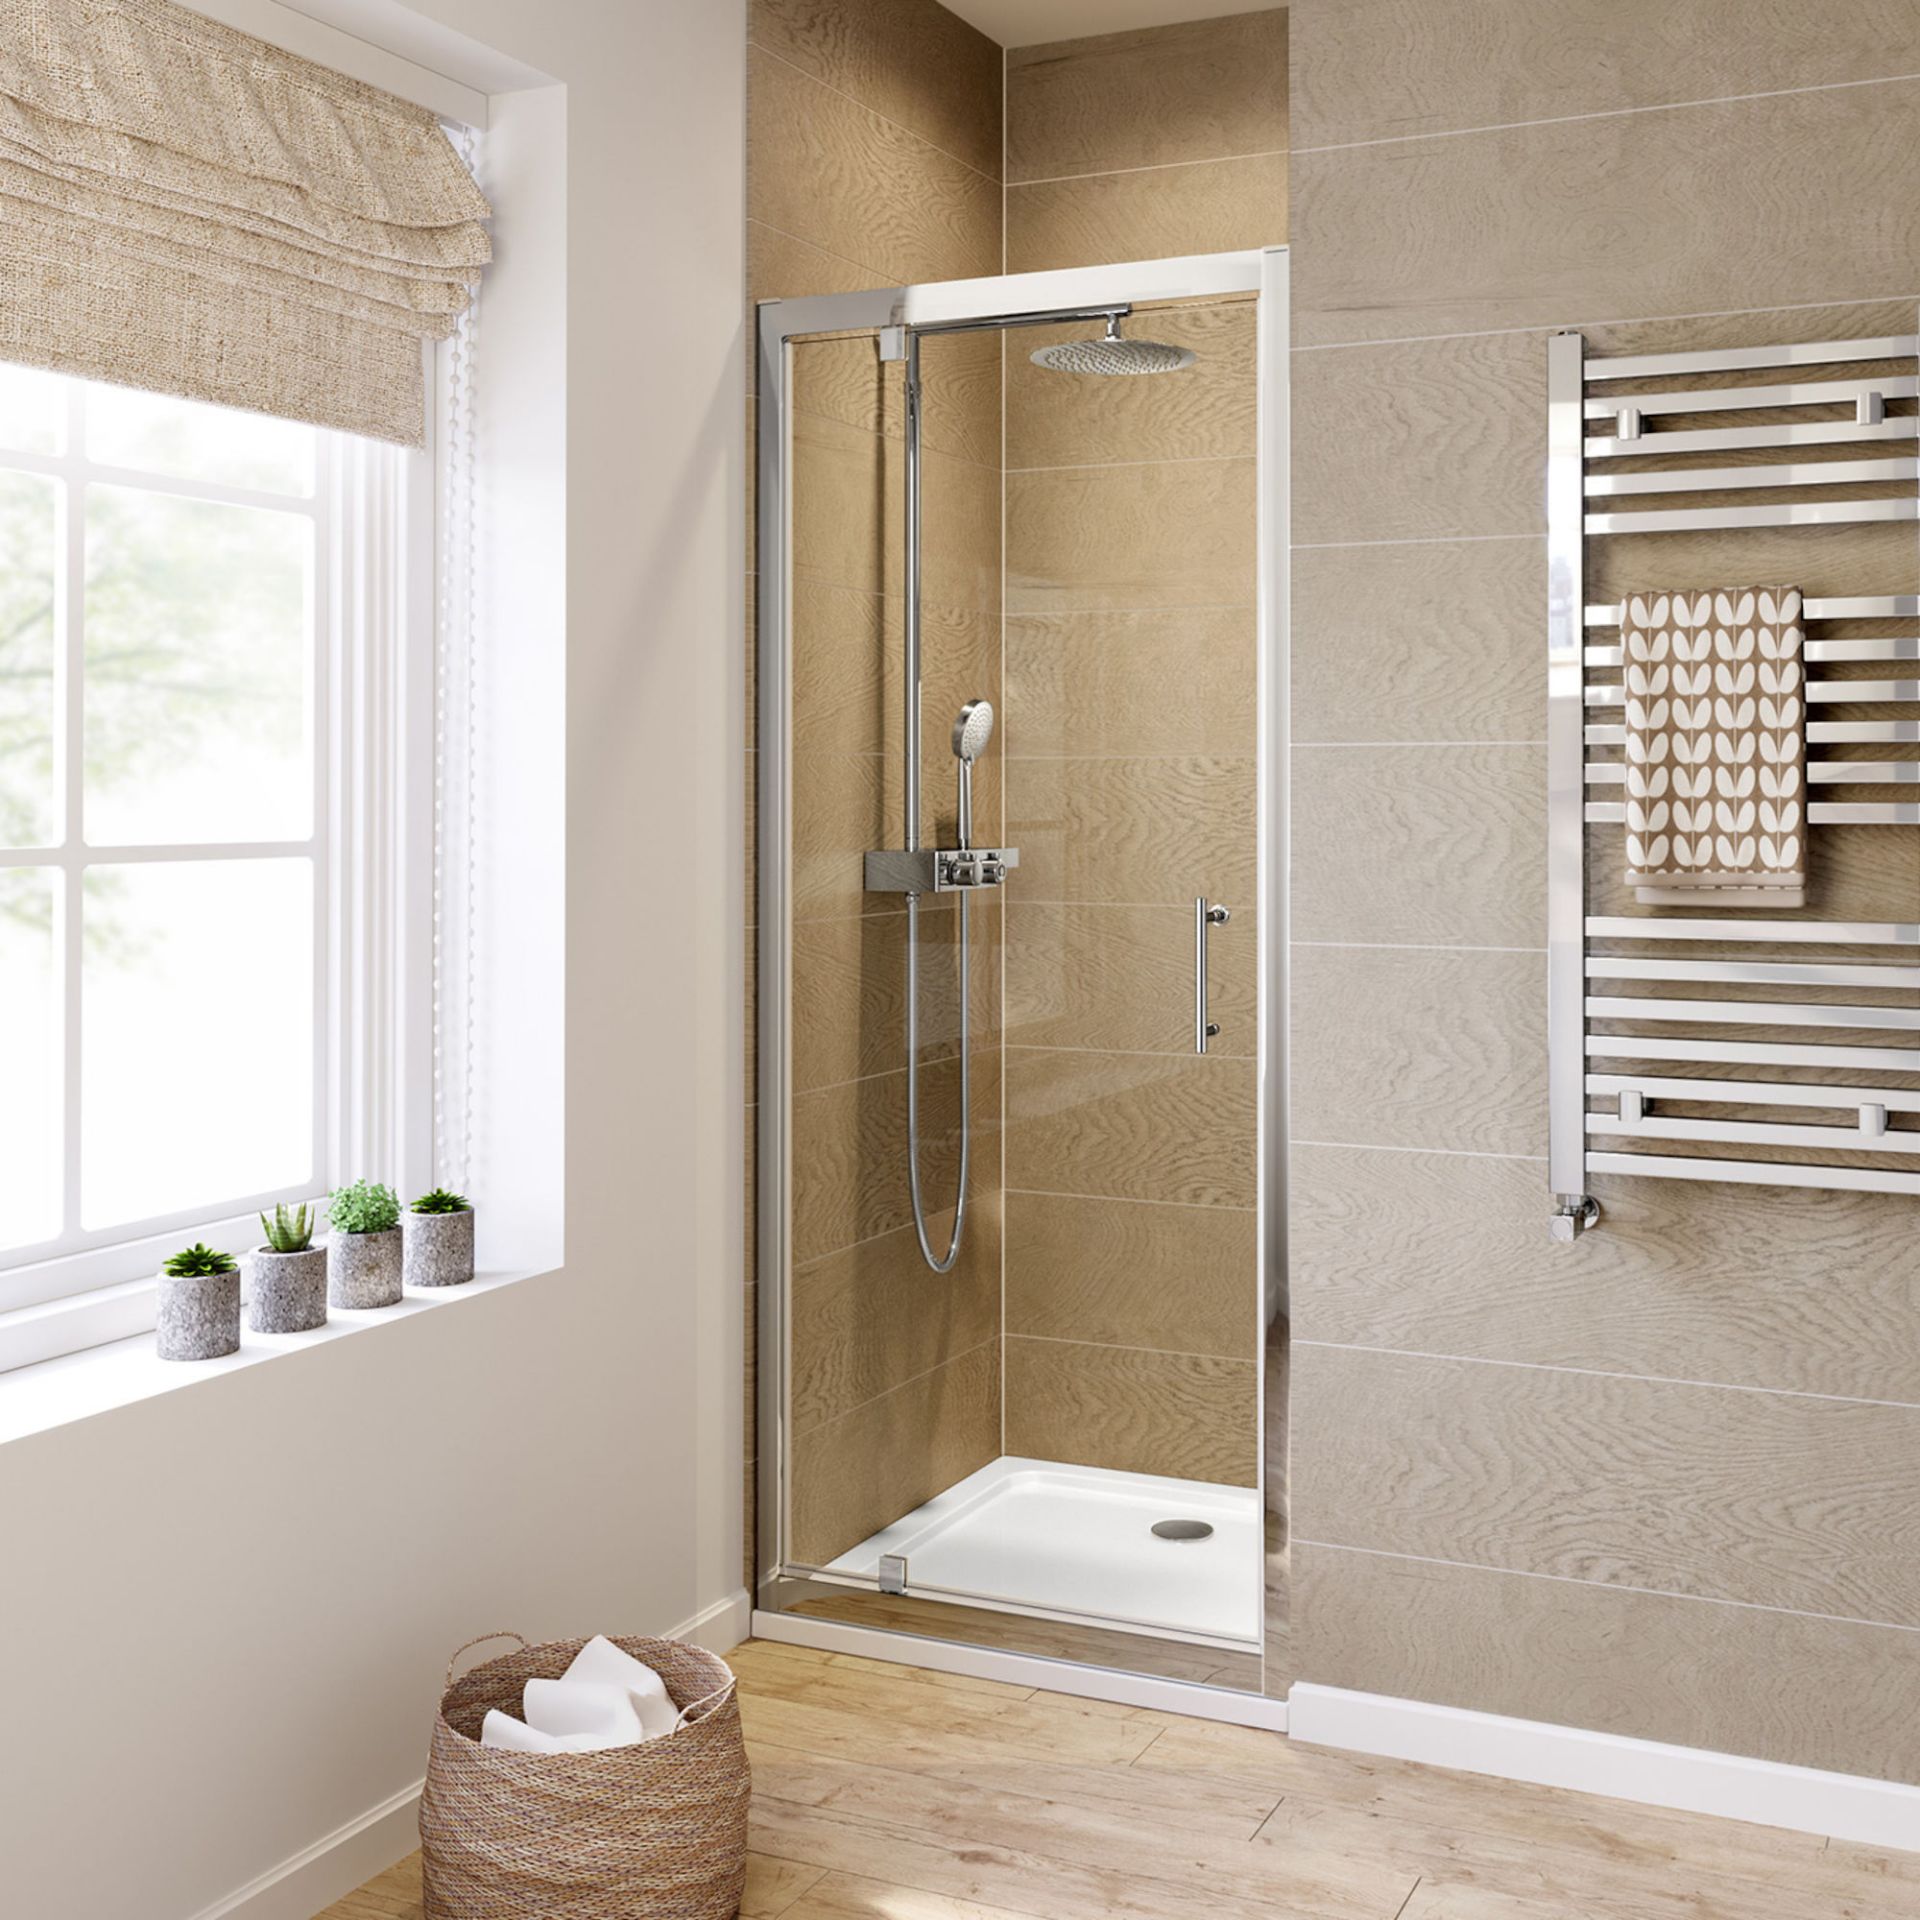 (CT170) 900mm - 6mm - Elements Pivot Shower Door. RRP £299.99. 6mm Safety Glass Fully waterproof - Image 3 of 3